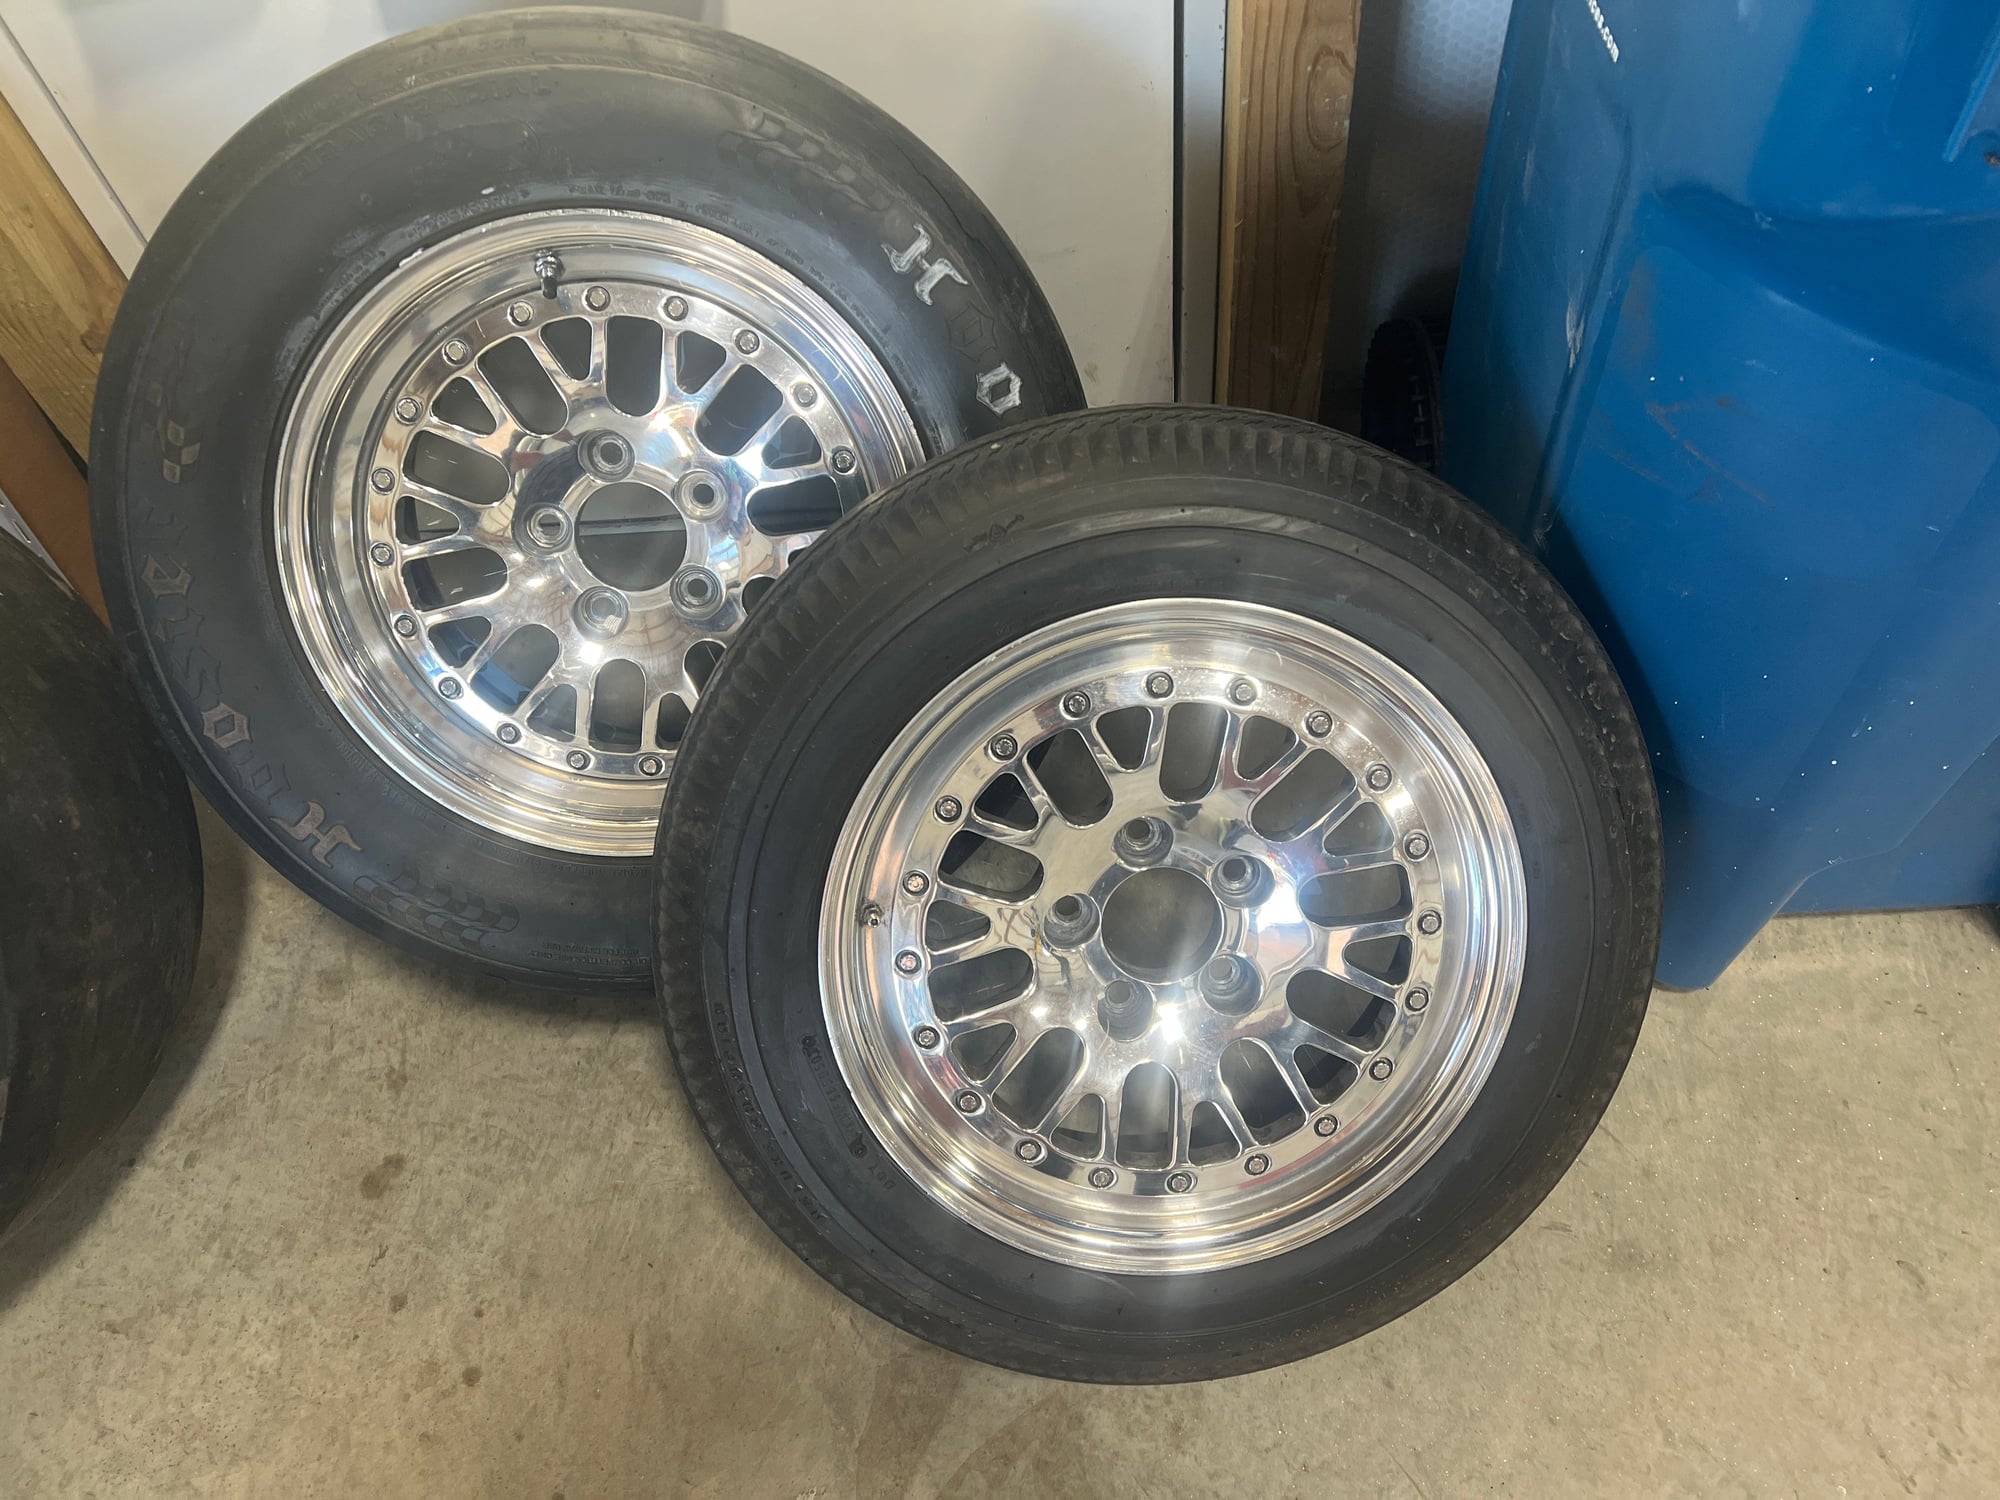 Wheels and Tires/Axles - 16” CCW classics drag pack - Used - Owensboro, KY 42301, United States